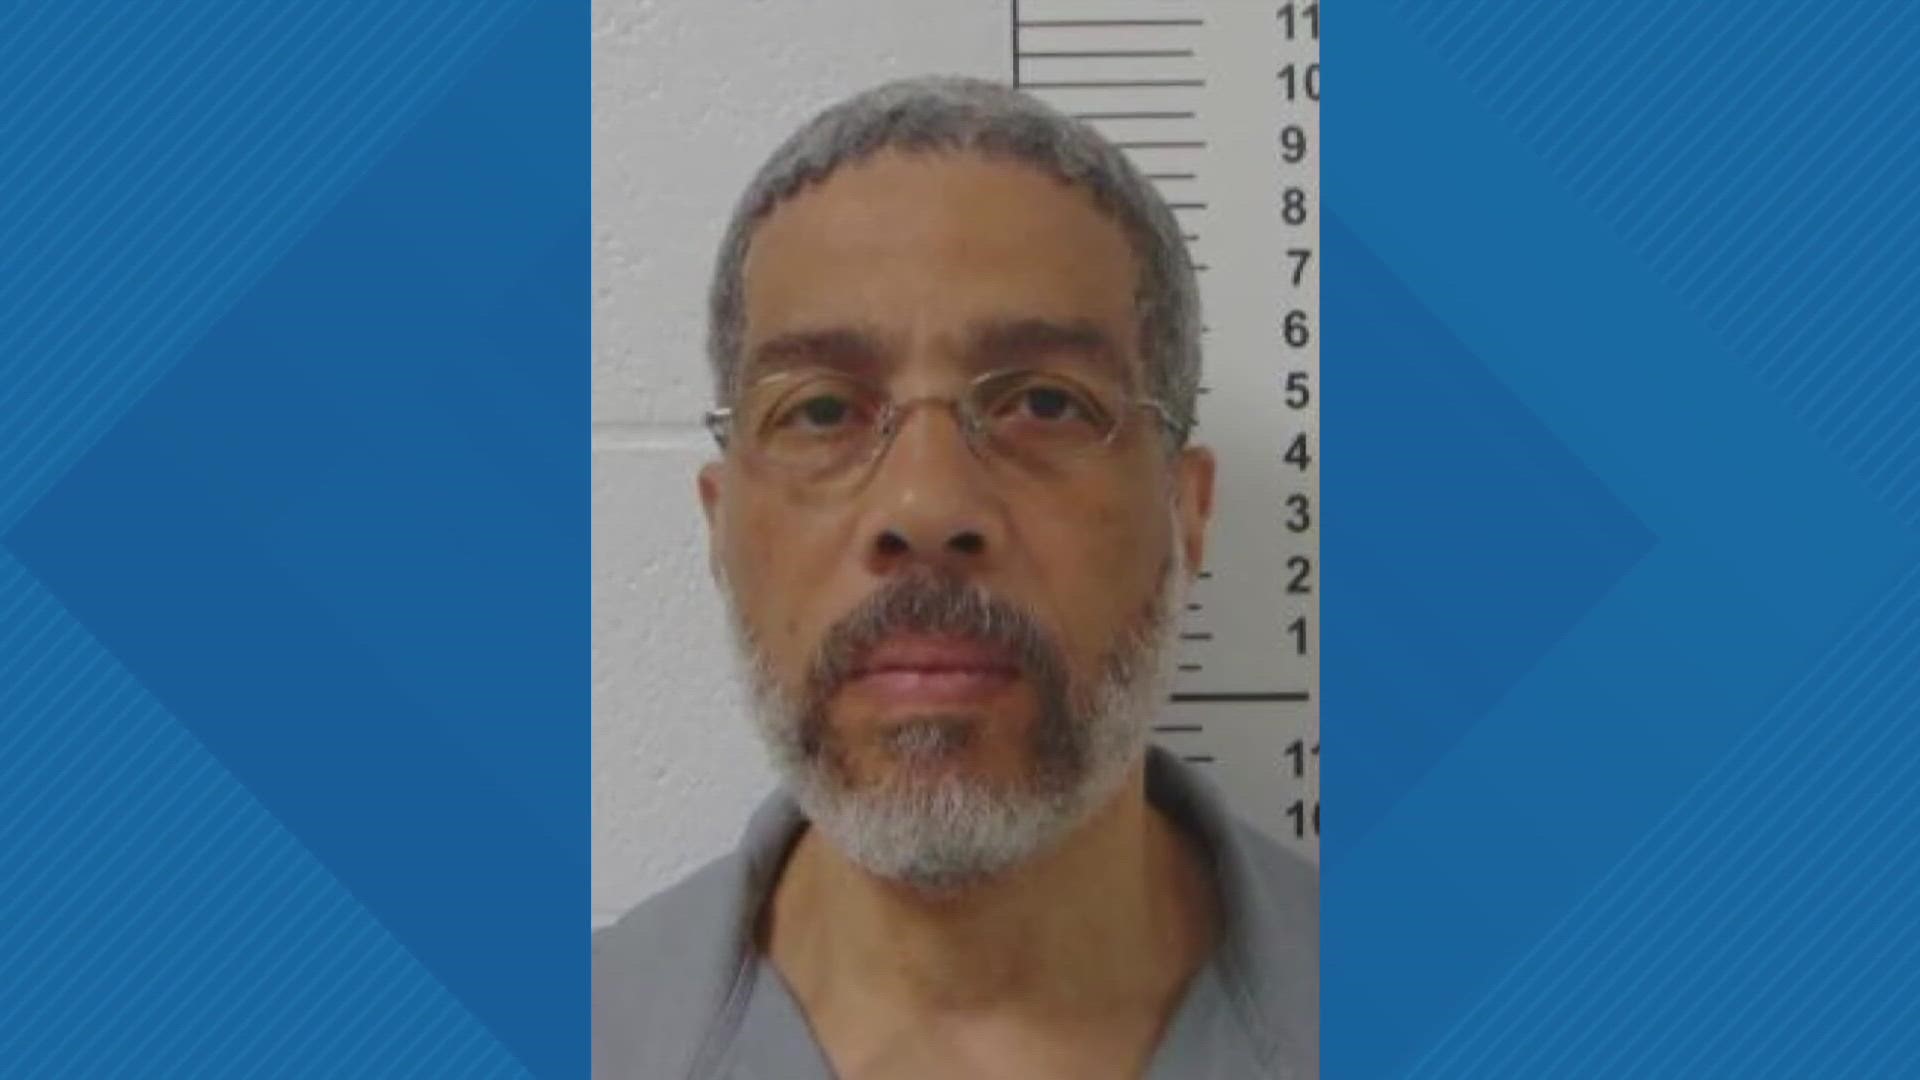 Gov. Parson confirmed Monday Taylor's execution  would continue. Taylor was convicted in the 2004 deaths of a mother and her three children in Jennings.